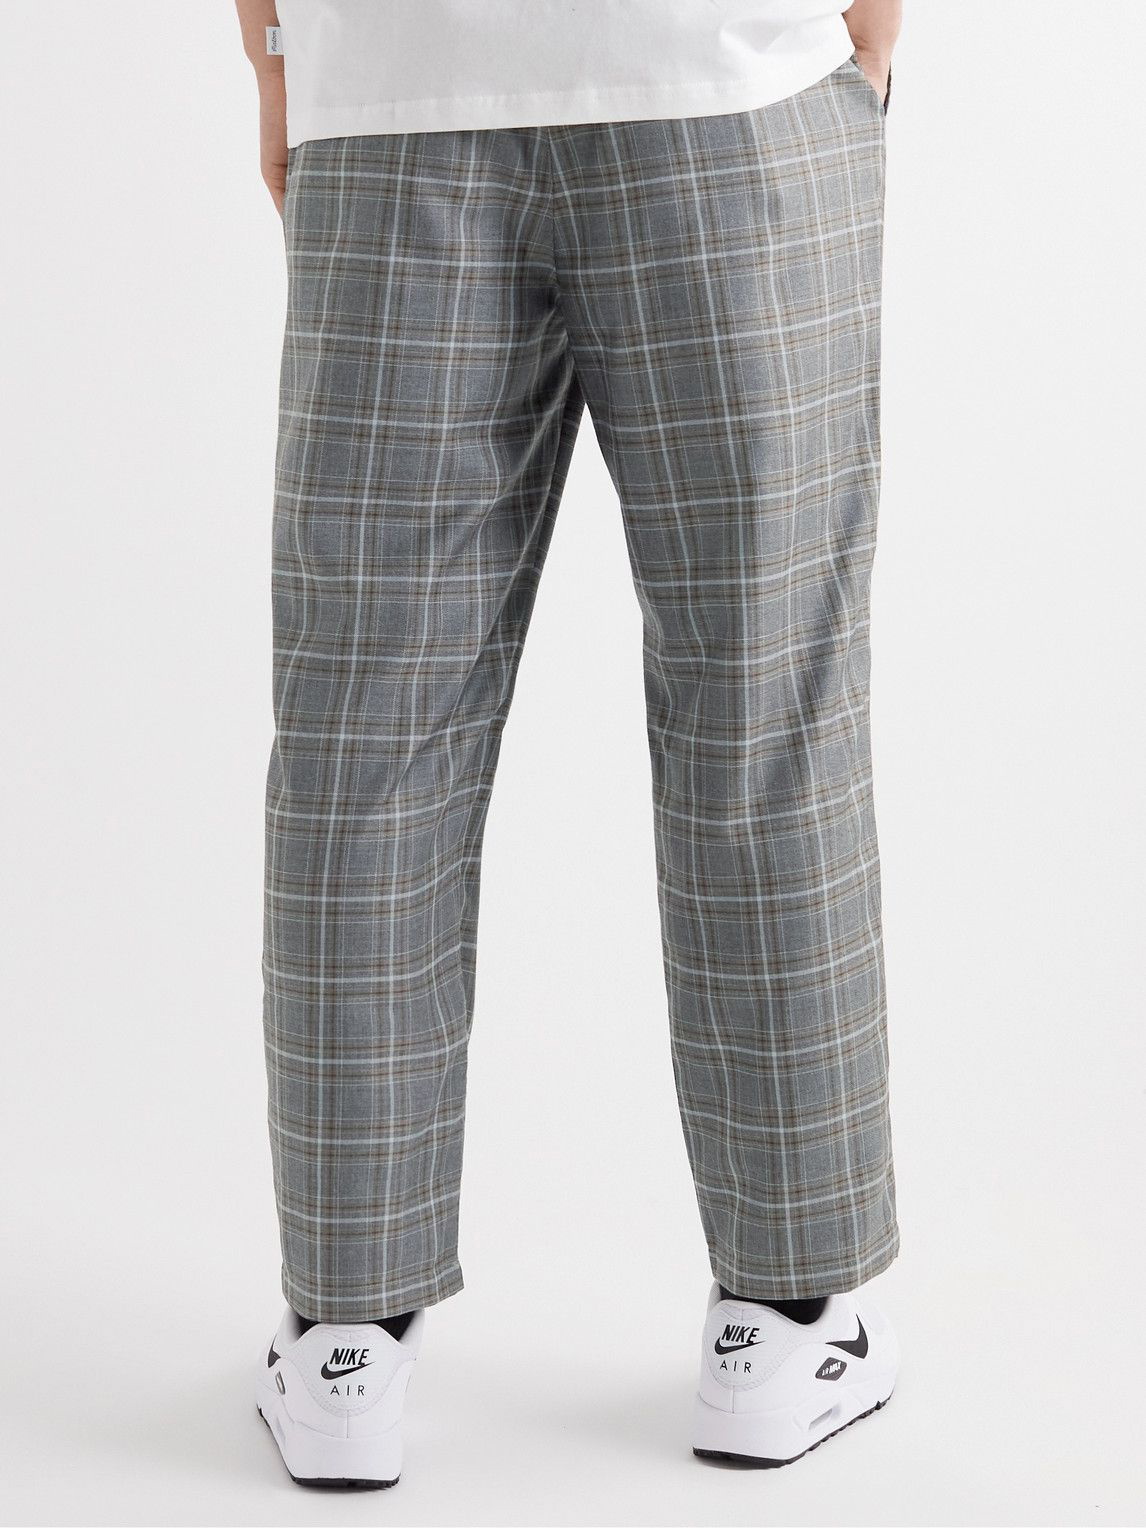 Dwyers amp Co Funky Checked Designer Flat Front Golf Trousers Kerry   eBay